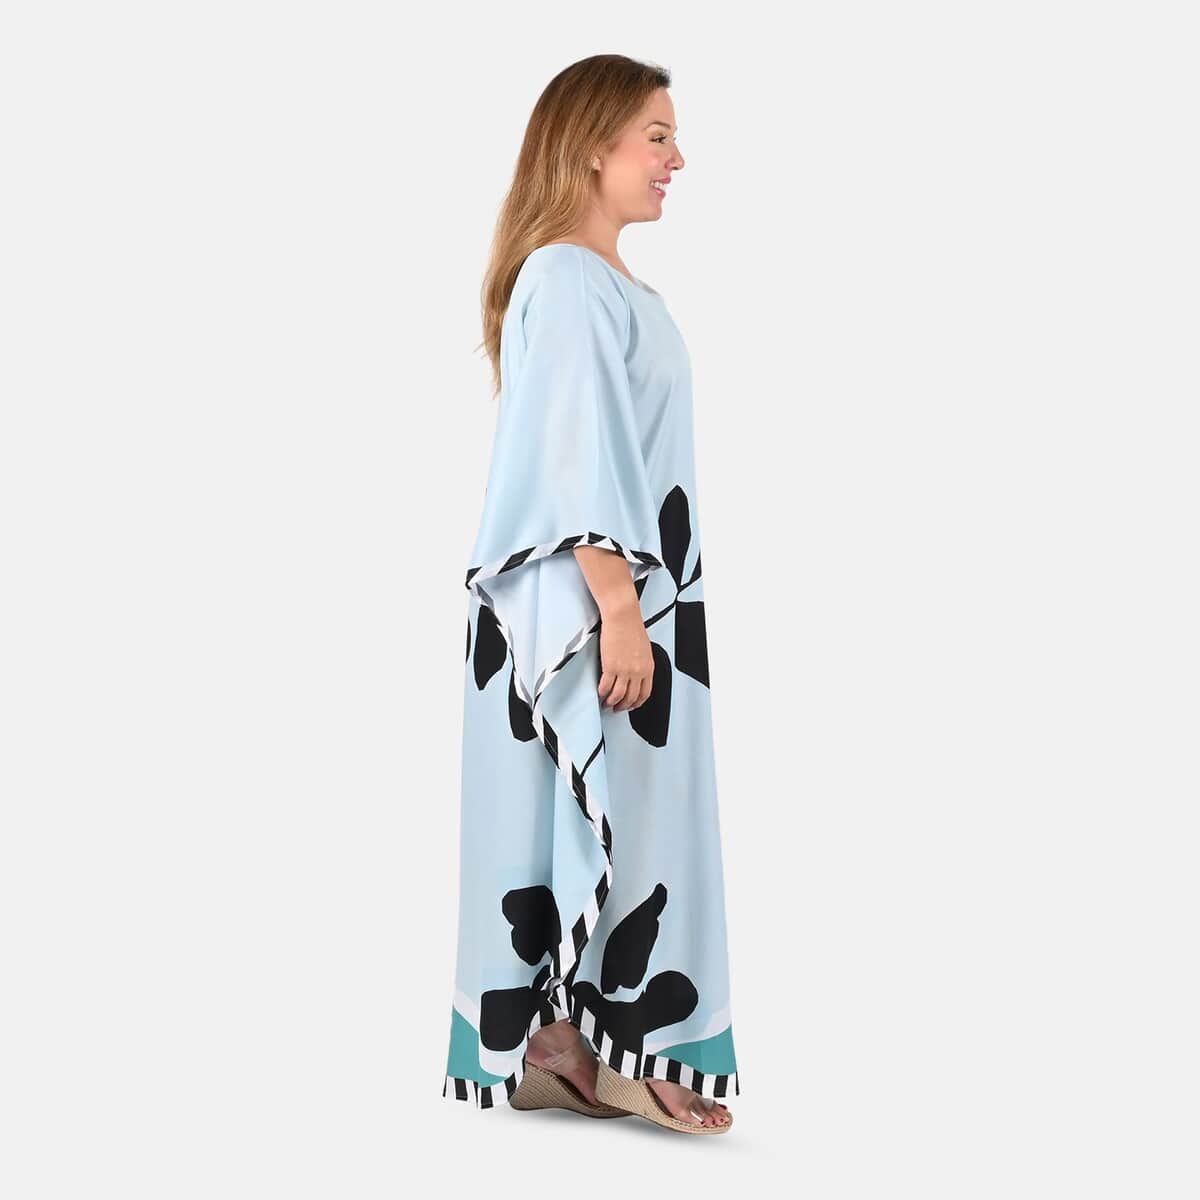 Tamsy Mint Leaf Asymmetrical Kaftan Dress - One Size Fits Most, Holiday Dress, Swimsuit Cover Up, Beach Cover Ups, Holiday Clothes image number 2